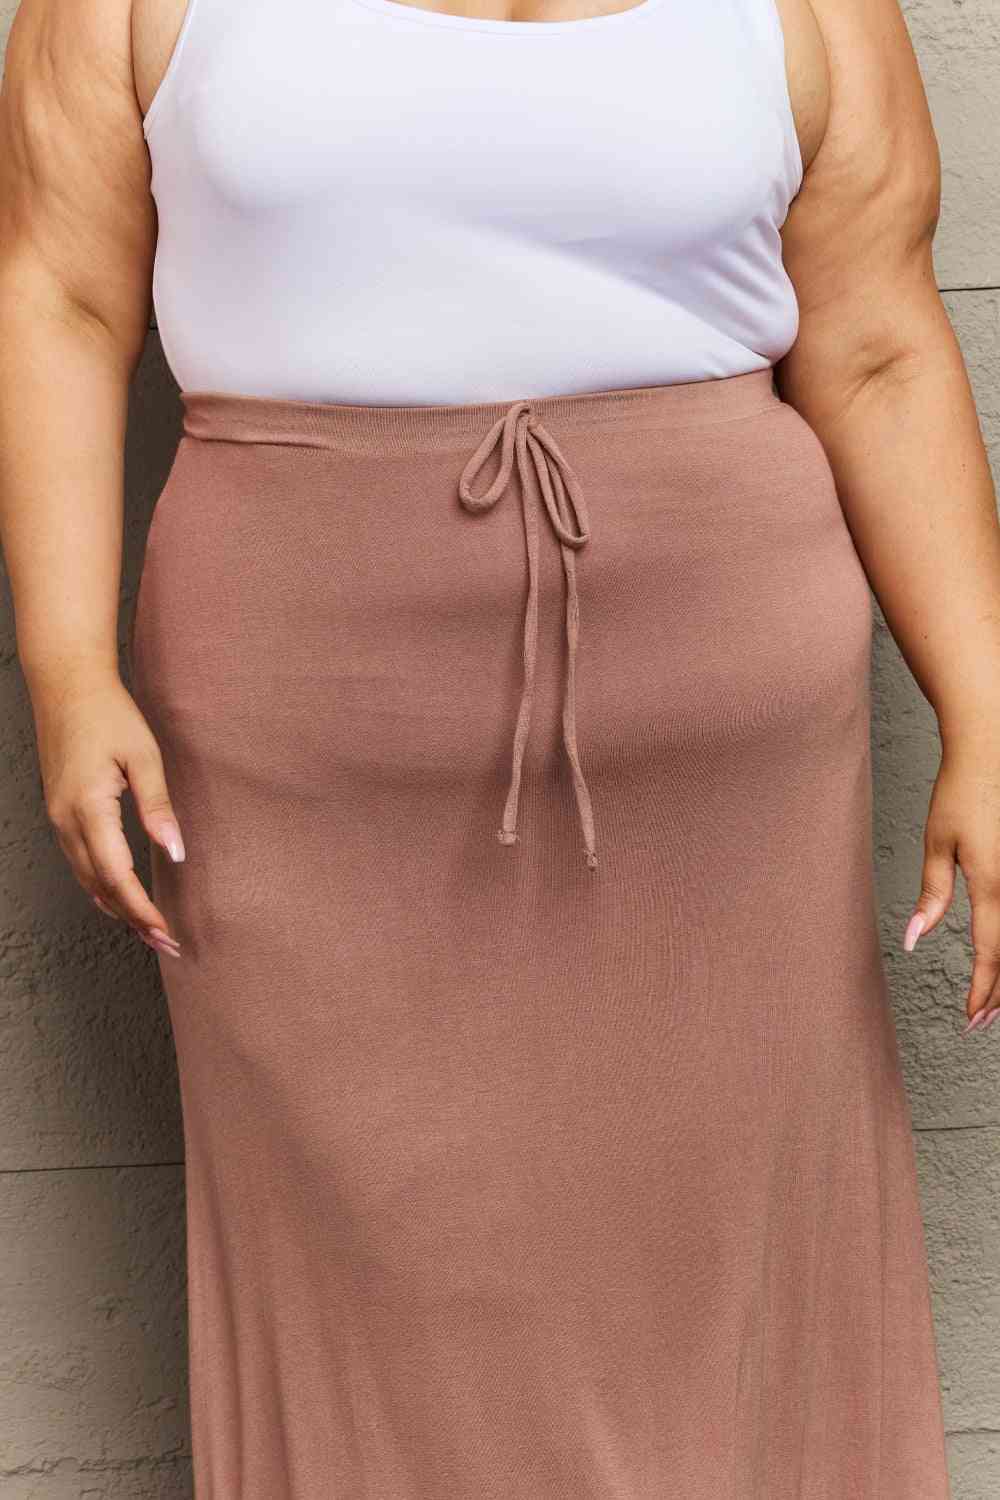 Chocolate lounge Easy Care Culture Code For The Day Full Size Flare Maxi Skirt in Chocolate